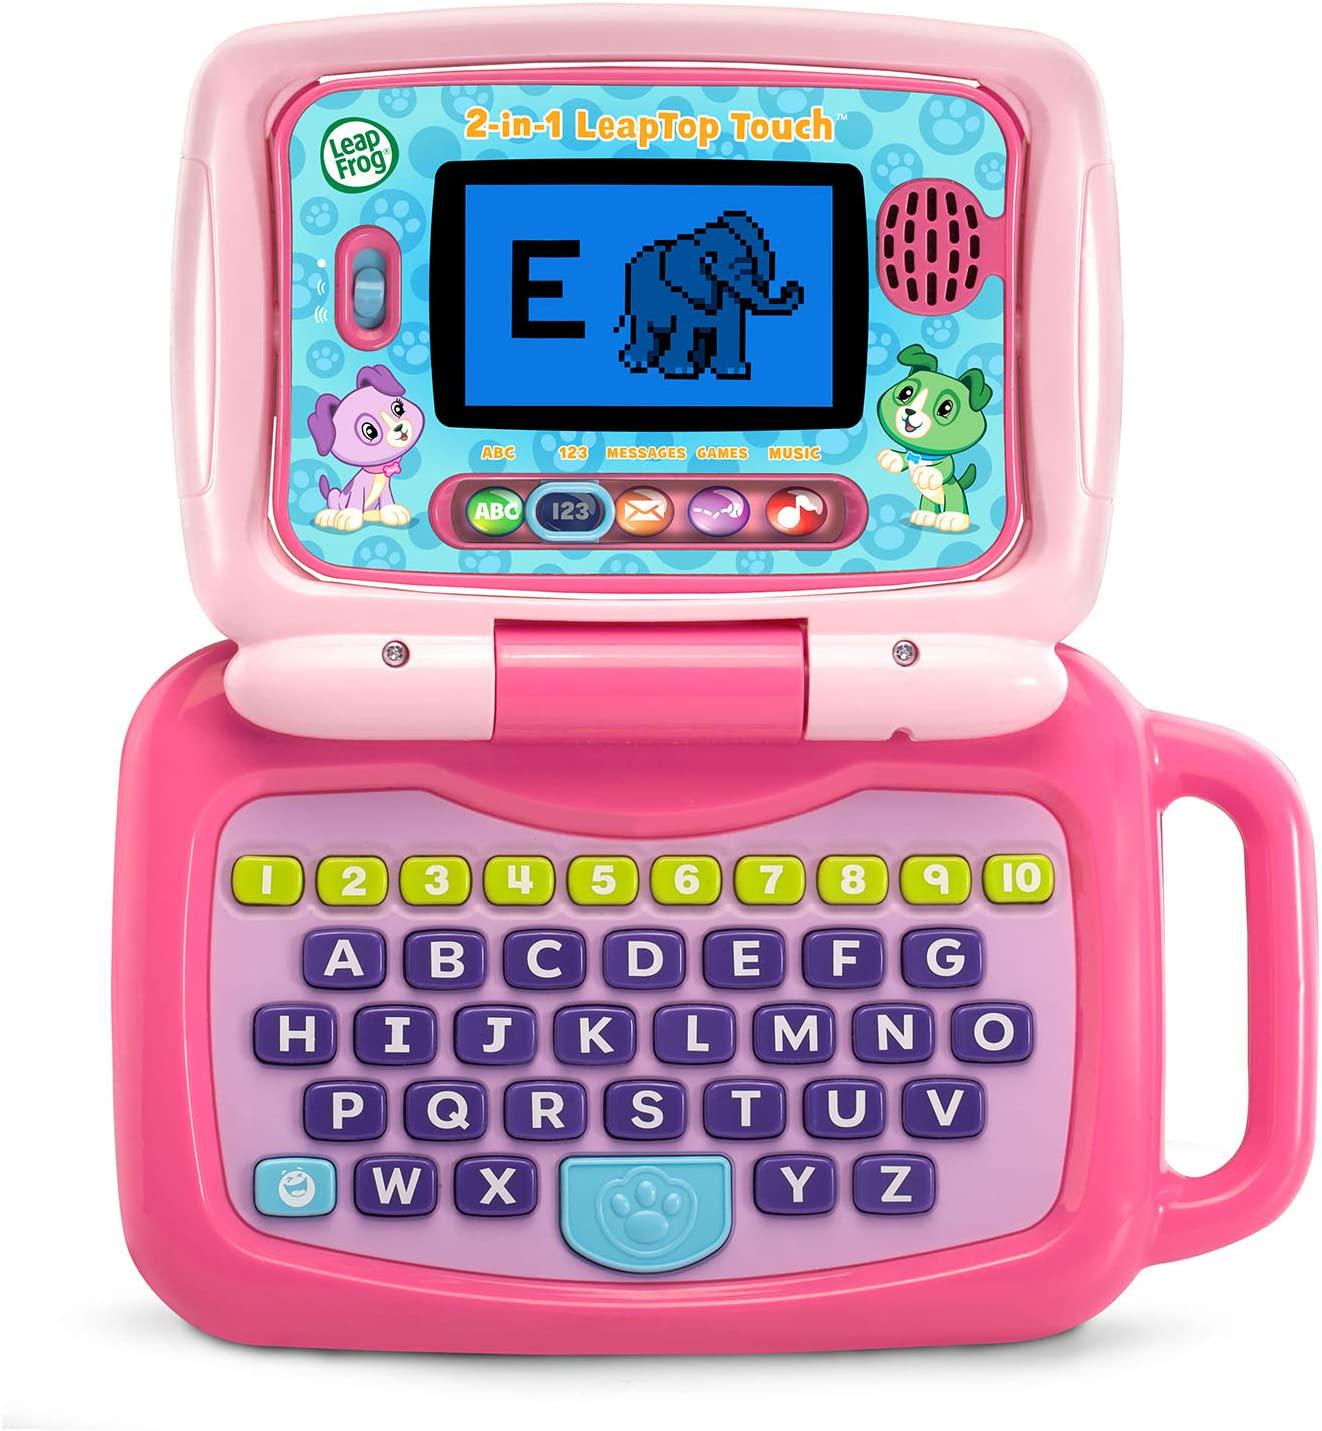 LeapFrog, LeapFrog 80-600958 2-in-1 Leaptop Touch, Frustration Free Packaging, Pink